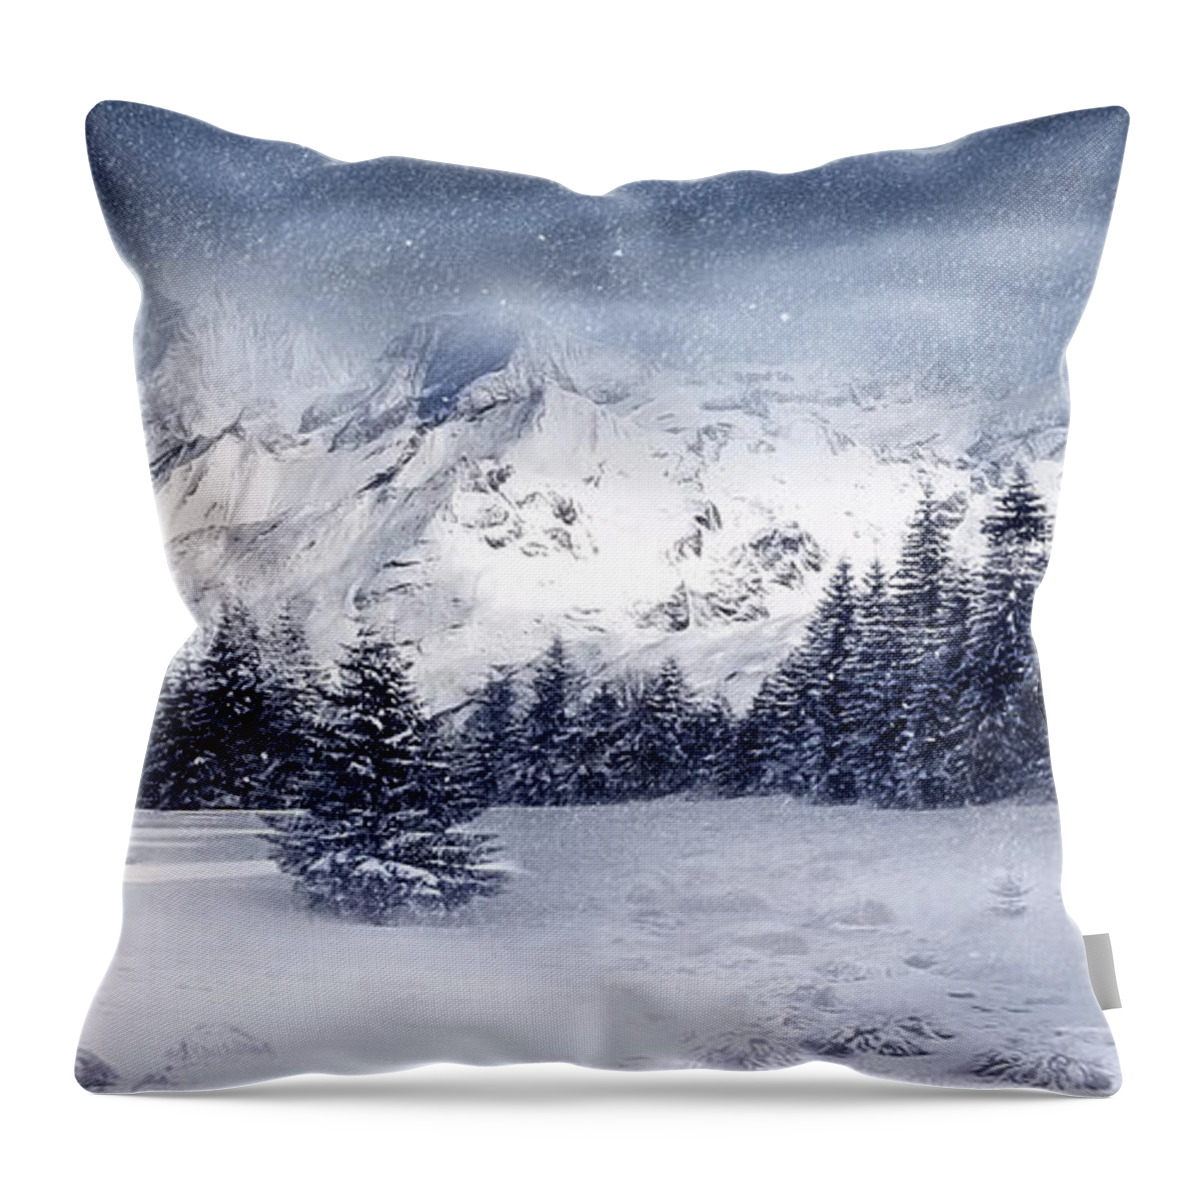 Beautiful Throw Pillow featuring the digital art Let it Snow by Svetlana Sewell